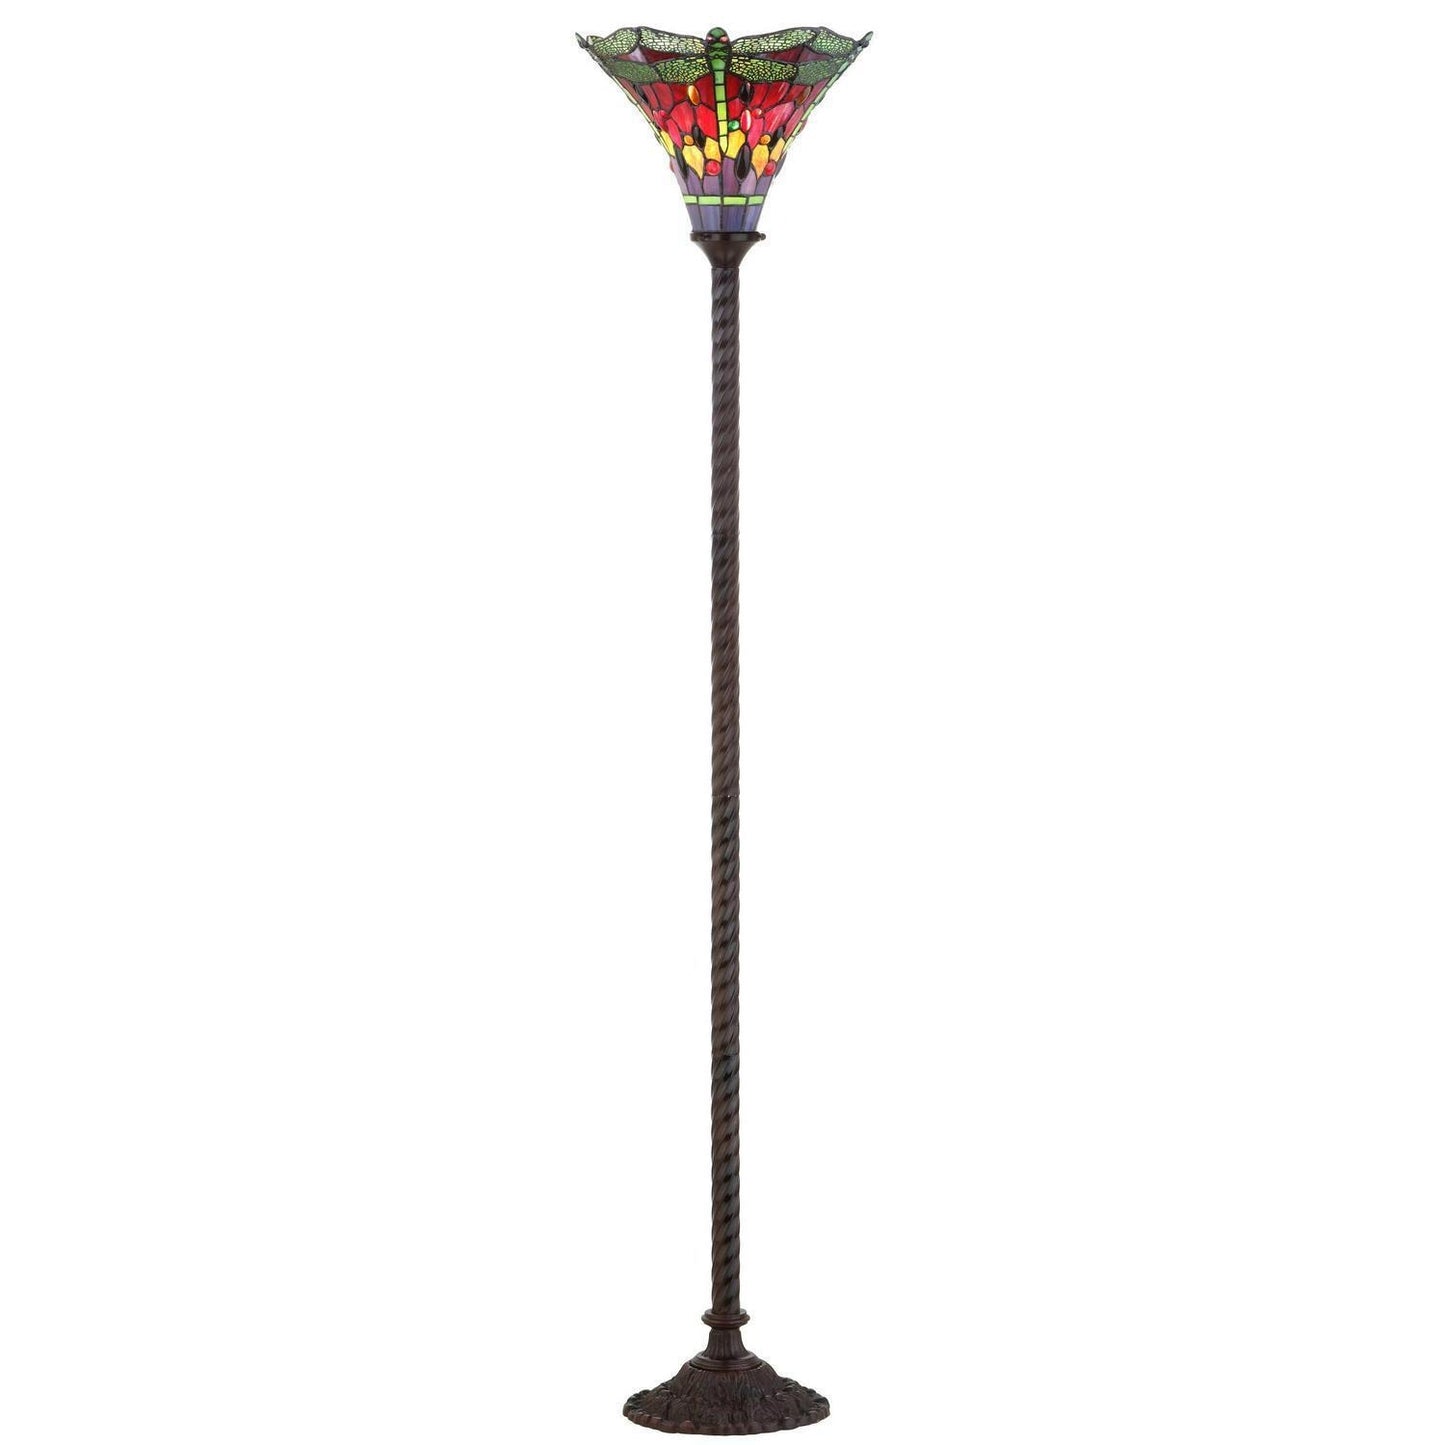 Tiffany Style Bright Red Stained Glass Dragonfly Torchiere Floor Lamp